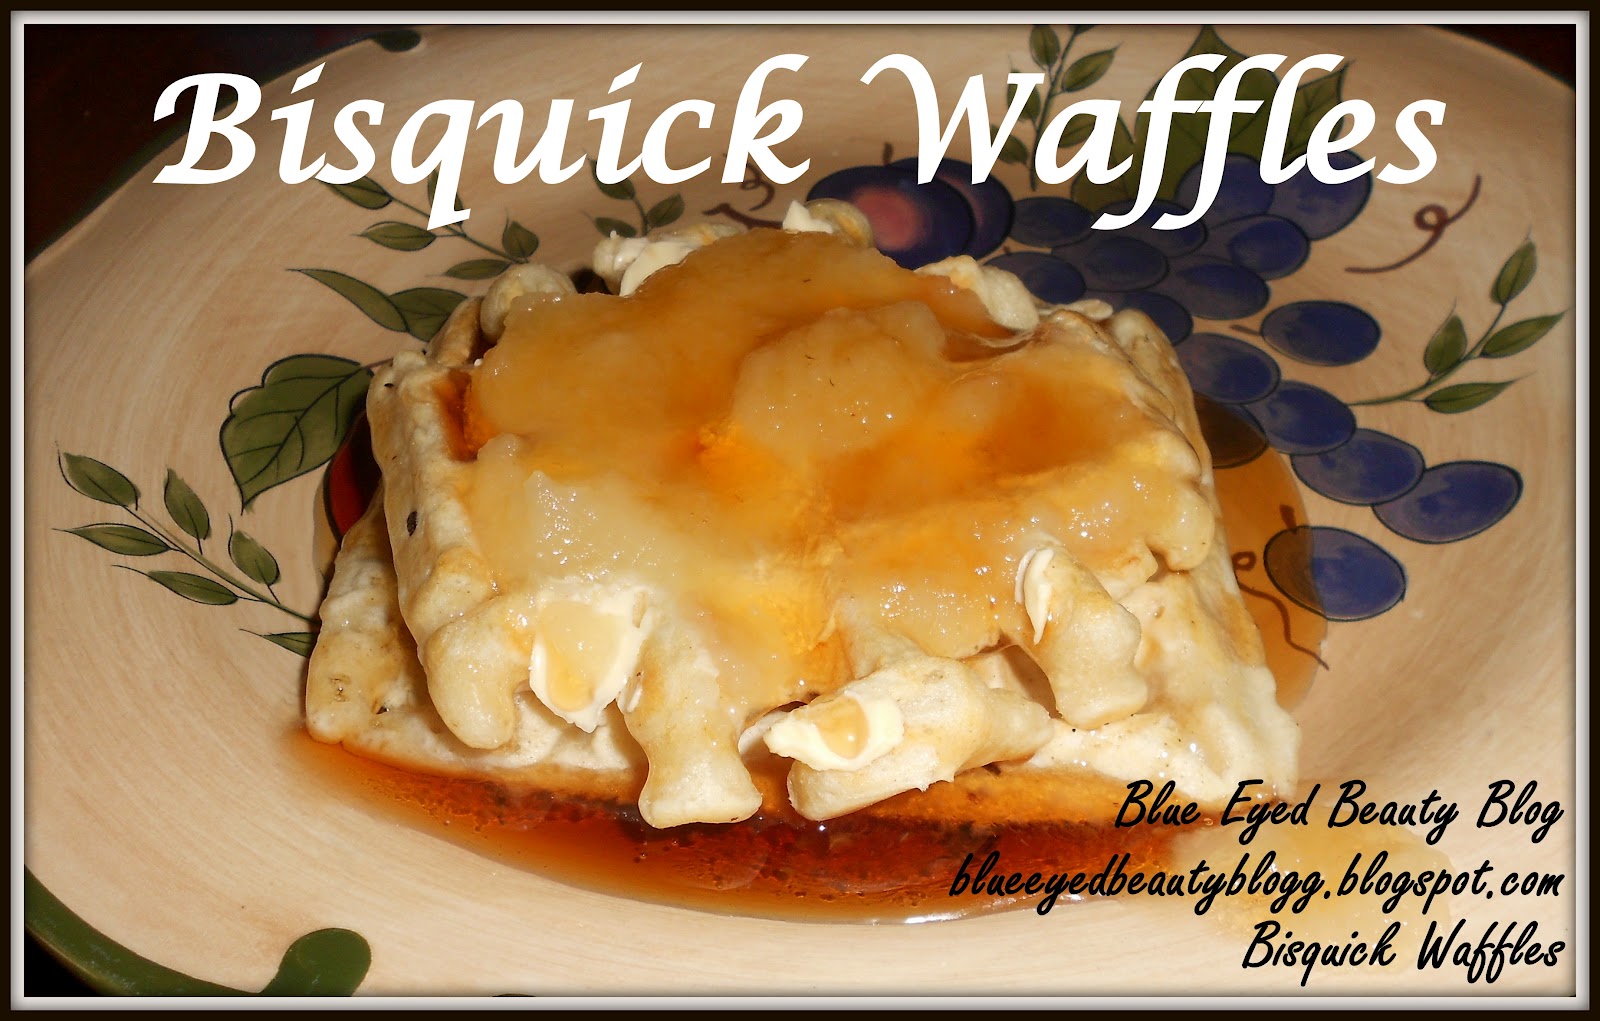 eggs  Bisquick bisquick Beauty Blue how Blog: pancakes to Waffles Eyed without make